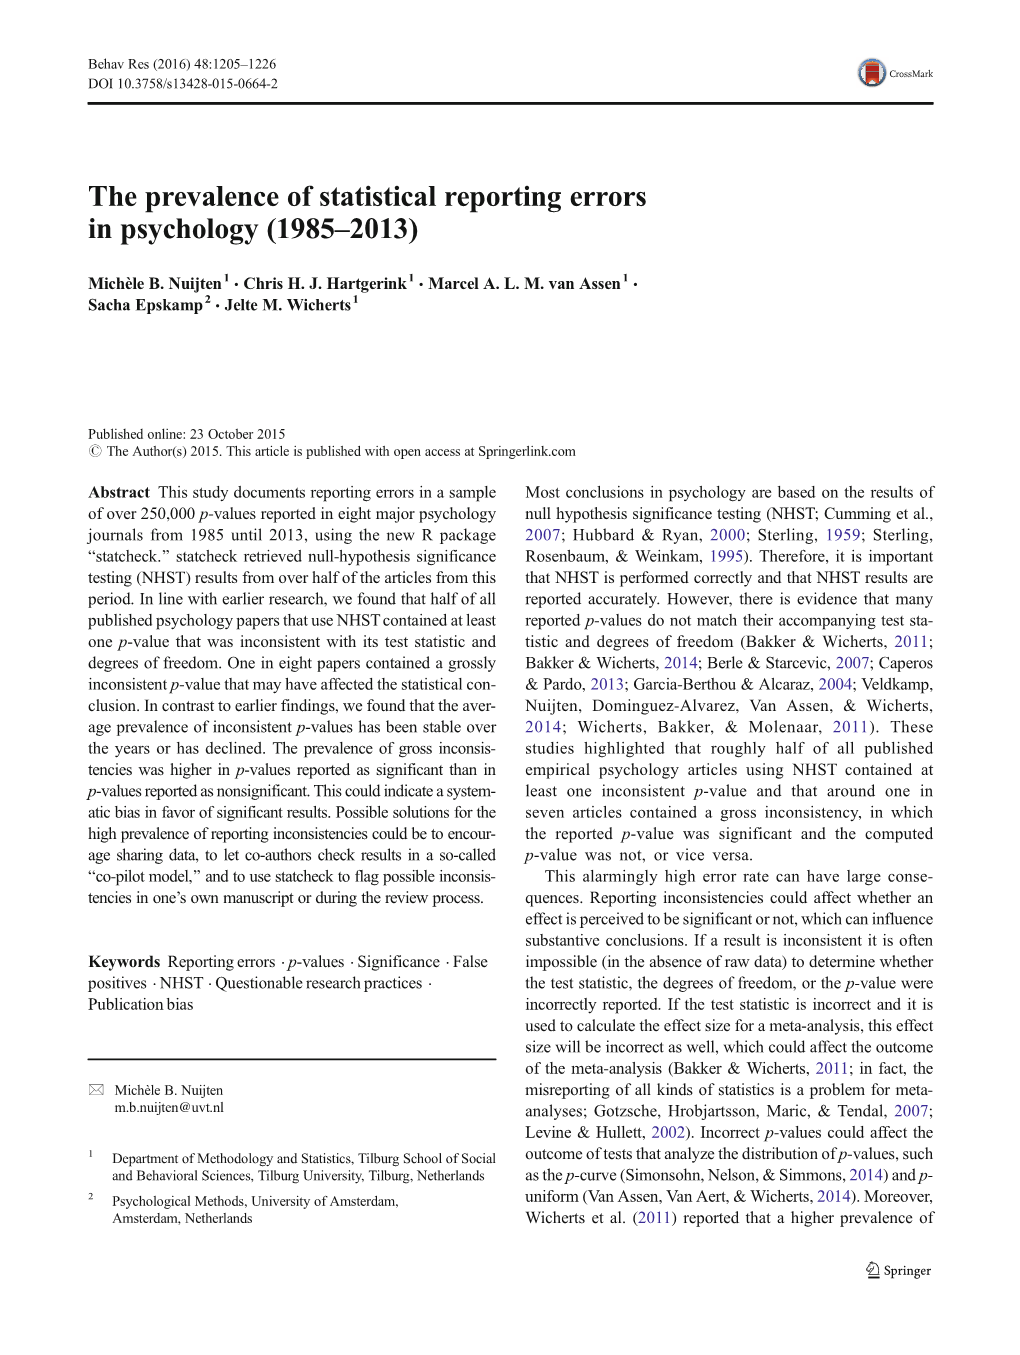 The Prevalence of Statistical Reporting Errors in Psychology (1985–2013)